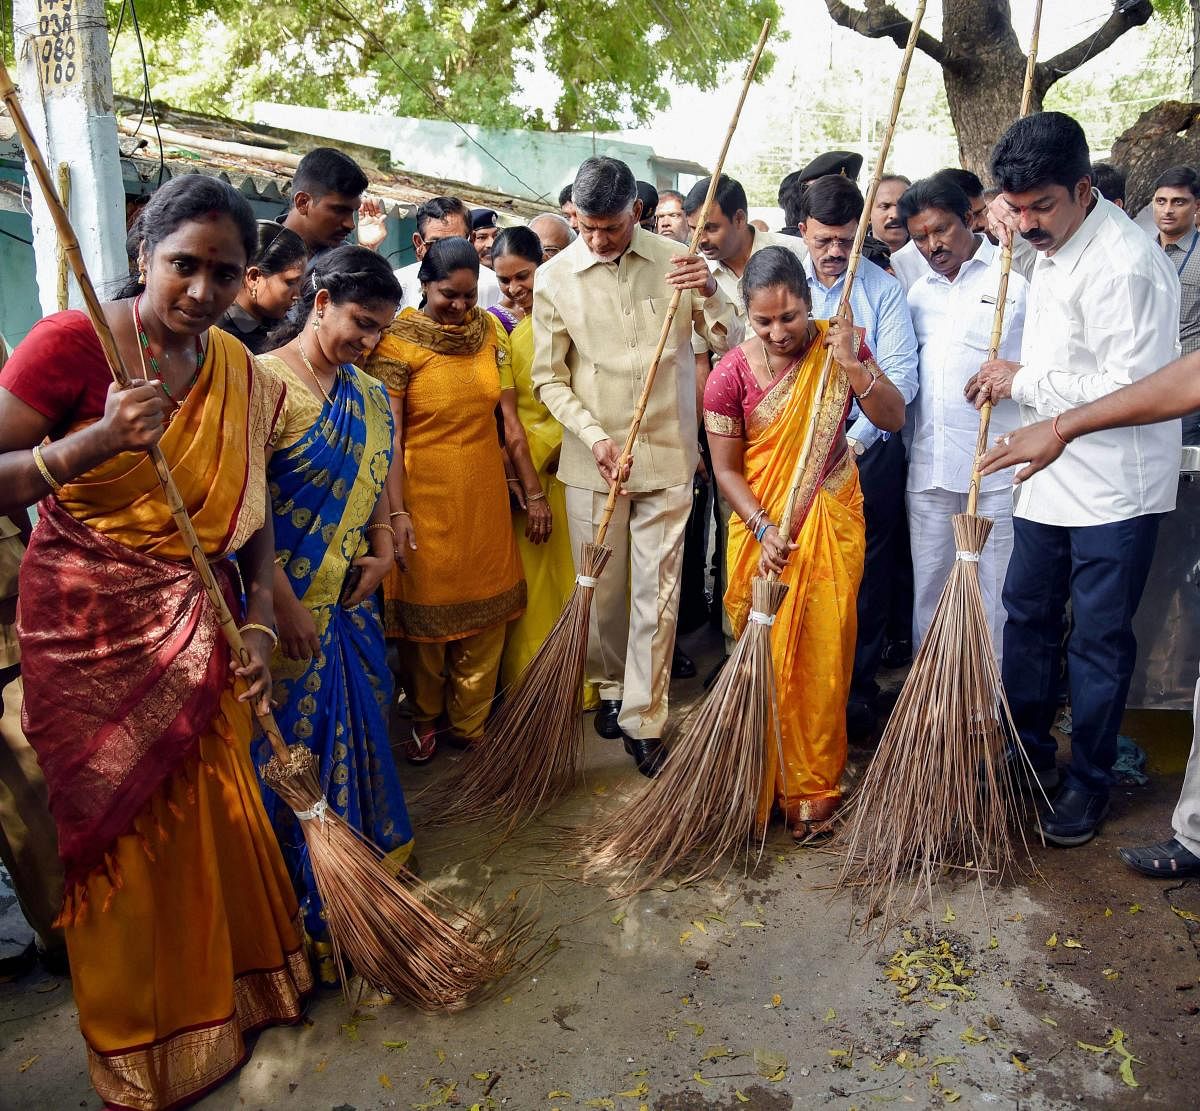 Andhra Pradesh Chief Minister Chandrababu Naidu participates in a cleanliness drive on the occasion of 'Gandhi Jayanti', in Vijayawada, on Tuesday. PTI